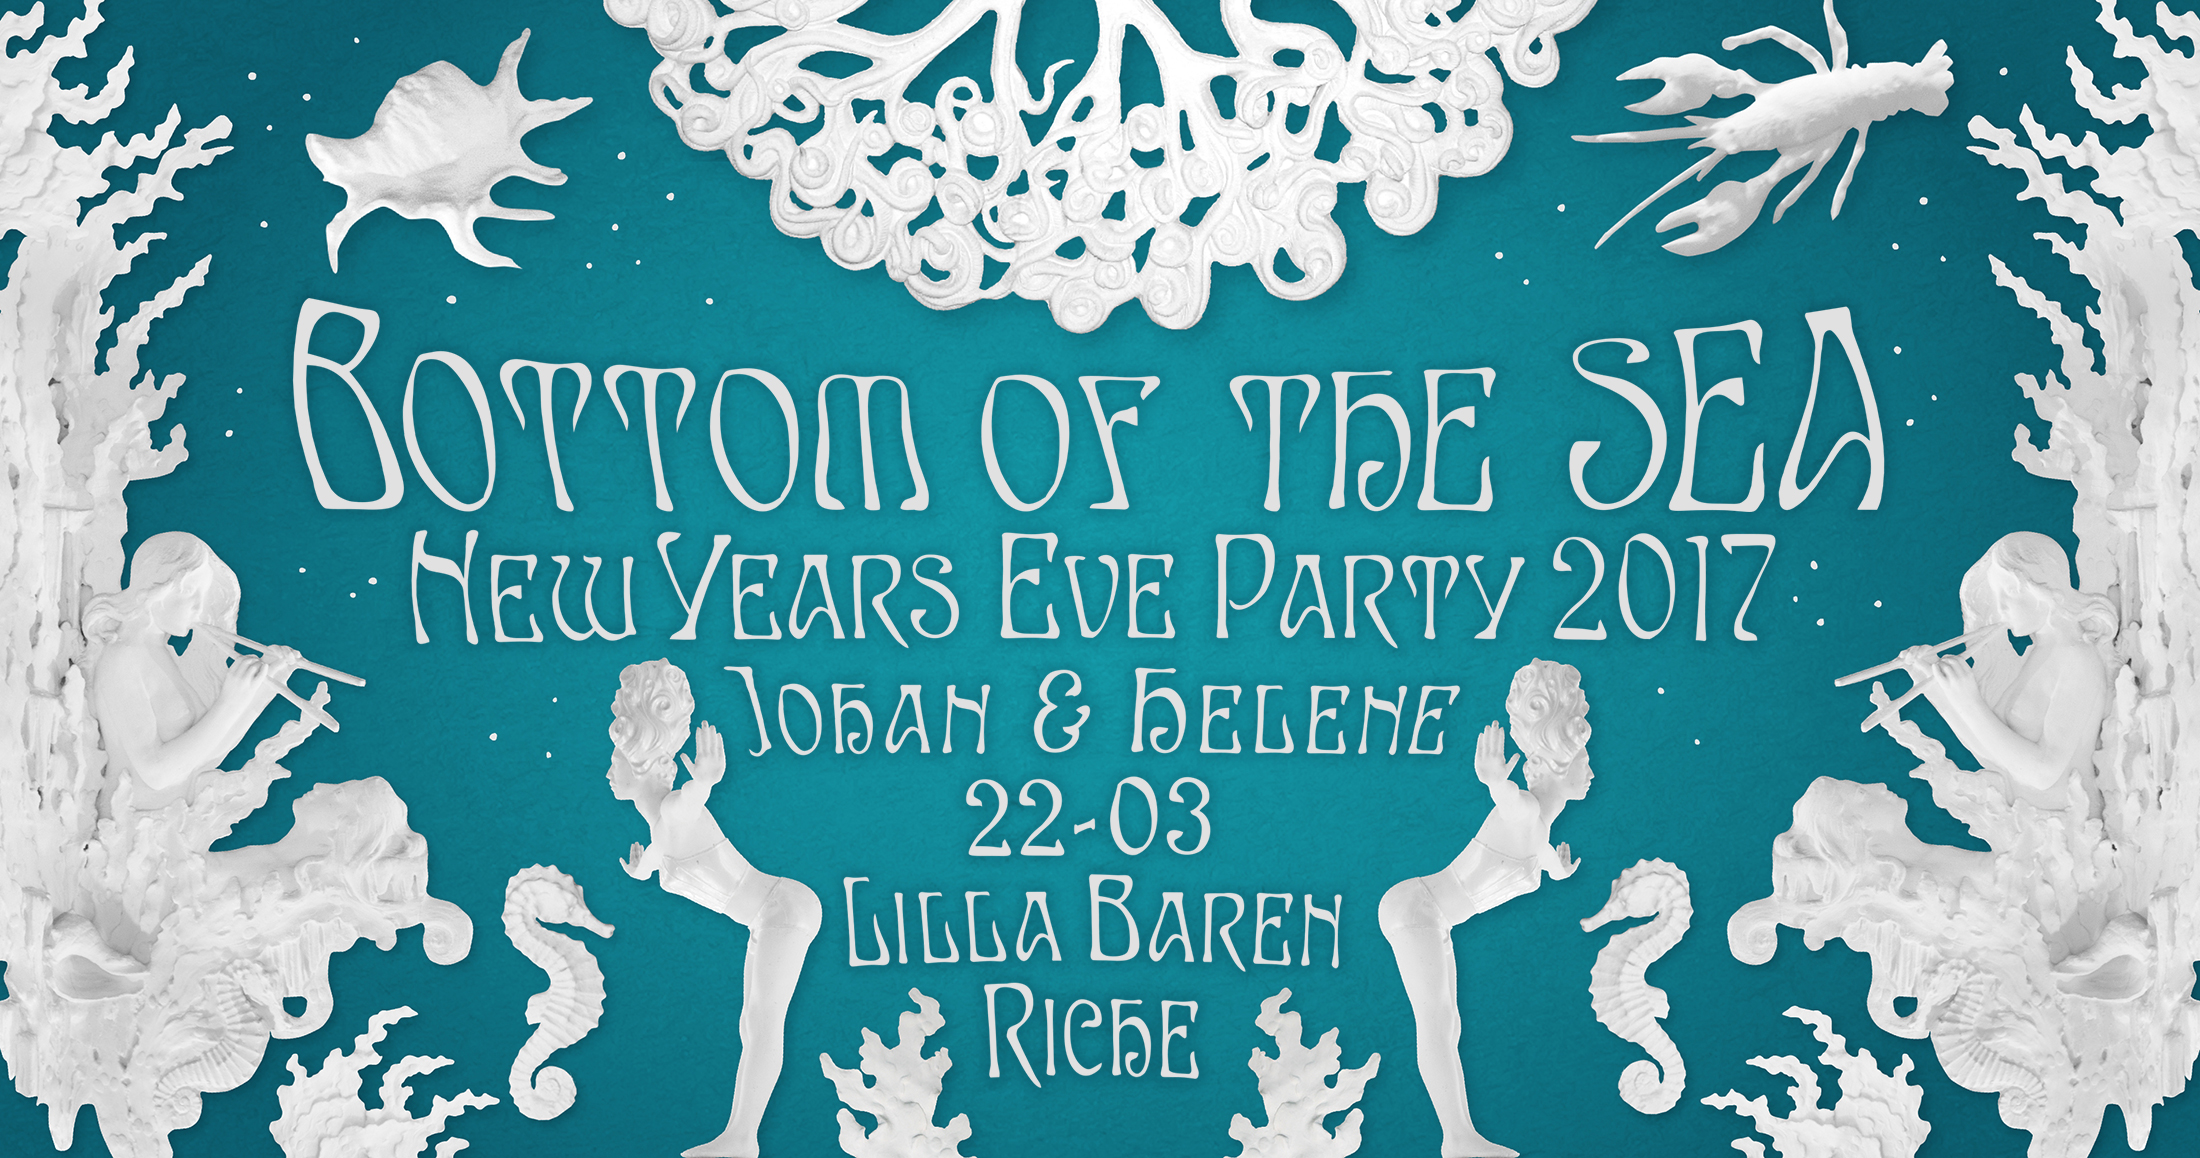 Behind the Amusement Park – Riche New Years Eve Party 2017 flyer